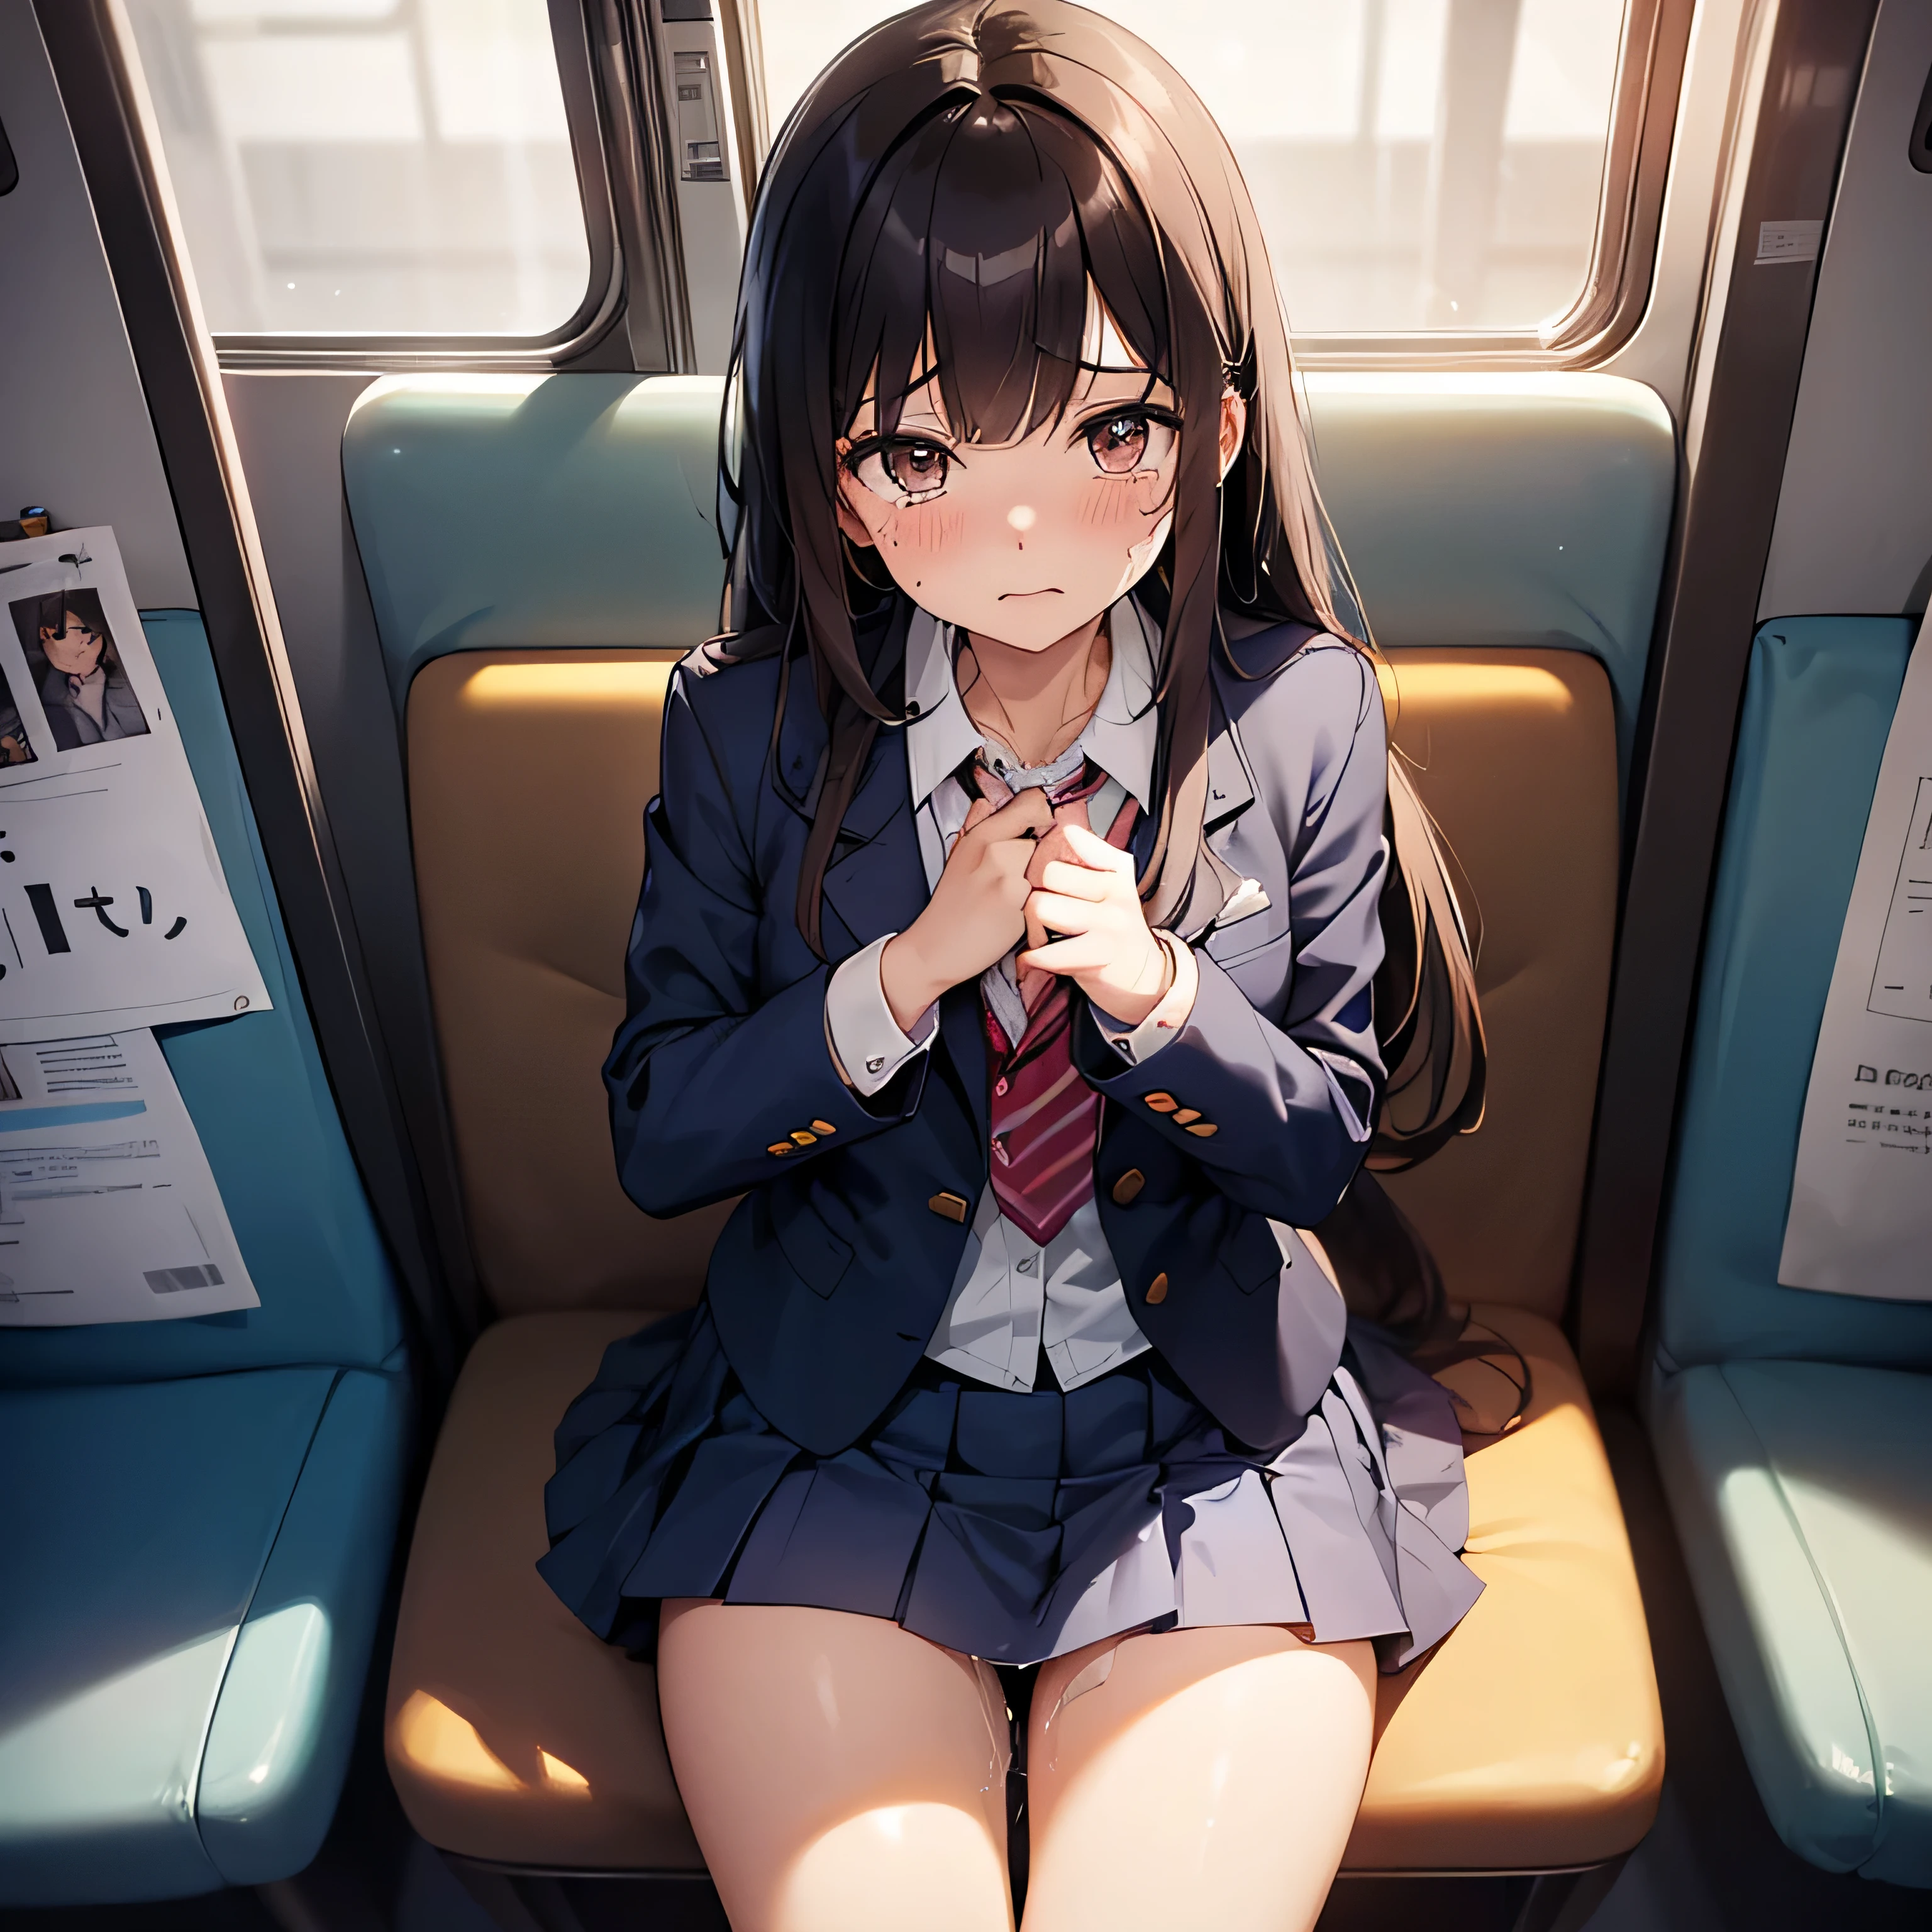 ((((muste piece, Top quality, best quality, 1 girl, solo, beautiful anime、detailed picture))))、(((17 years old、slender、thin thighs、normal chest、dark brown hair、straight、long hair、brown eyes、round eyes、Clear system、))),((((In a crowded train、blue sheet、Seats lined up parallel to the window)))、((navy blue blazer、navy blue skirt、、pink panties、flip up the skirt))、(((Sit in the seat、Are crying、shedding a large amount of tears、Climax、embarrassing、disgust、vibrator in underwear、masturbation、love juice overflows)))、NSFW、image from the knees up、